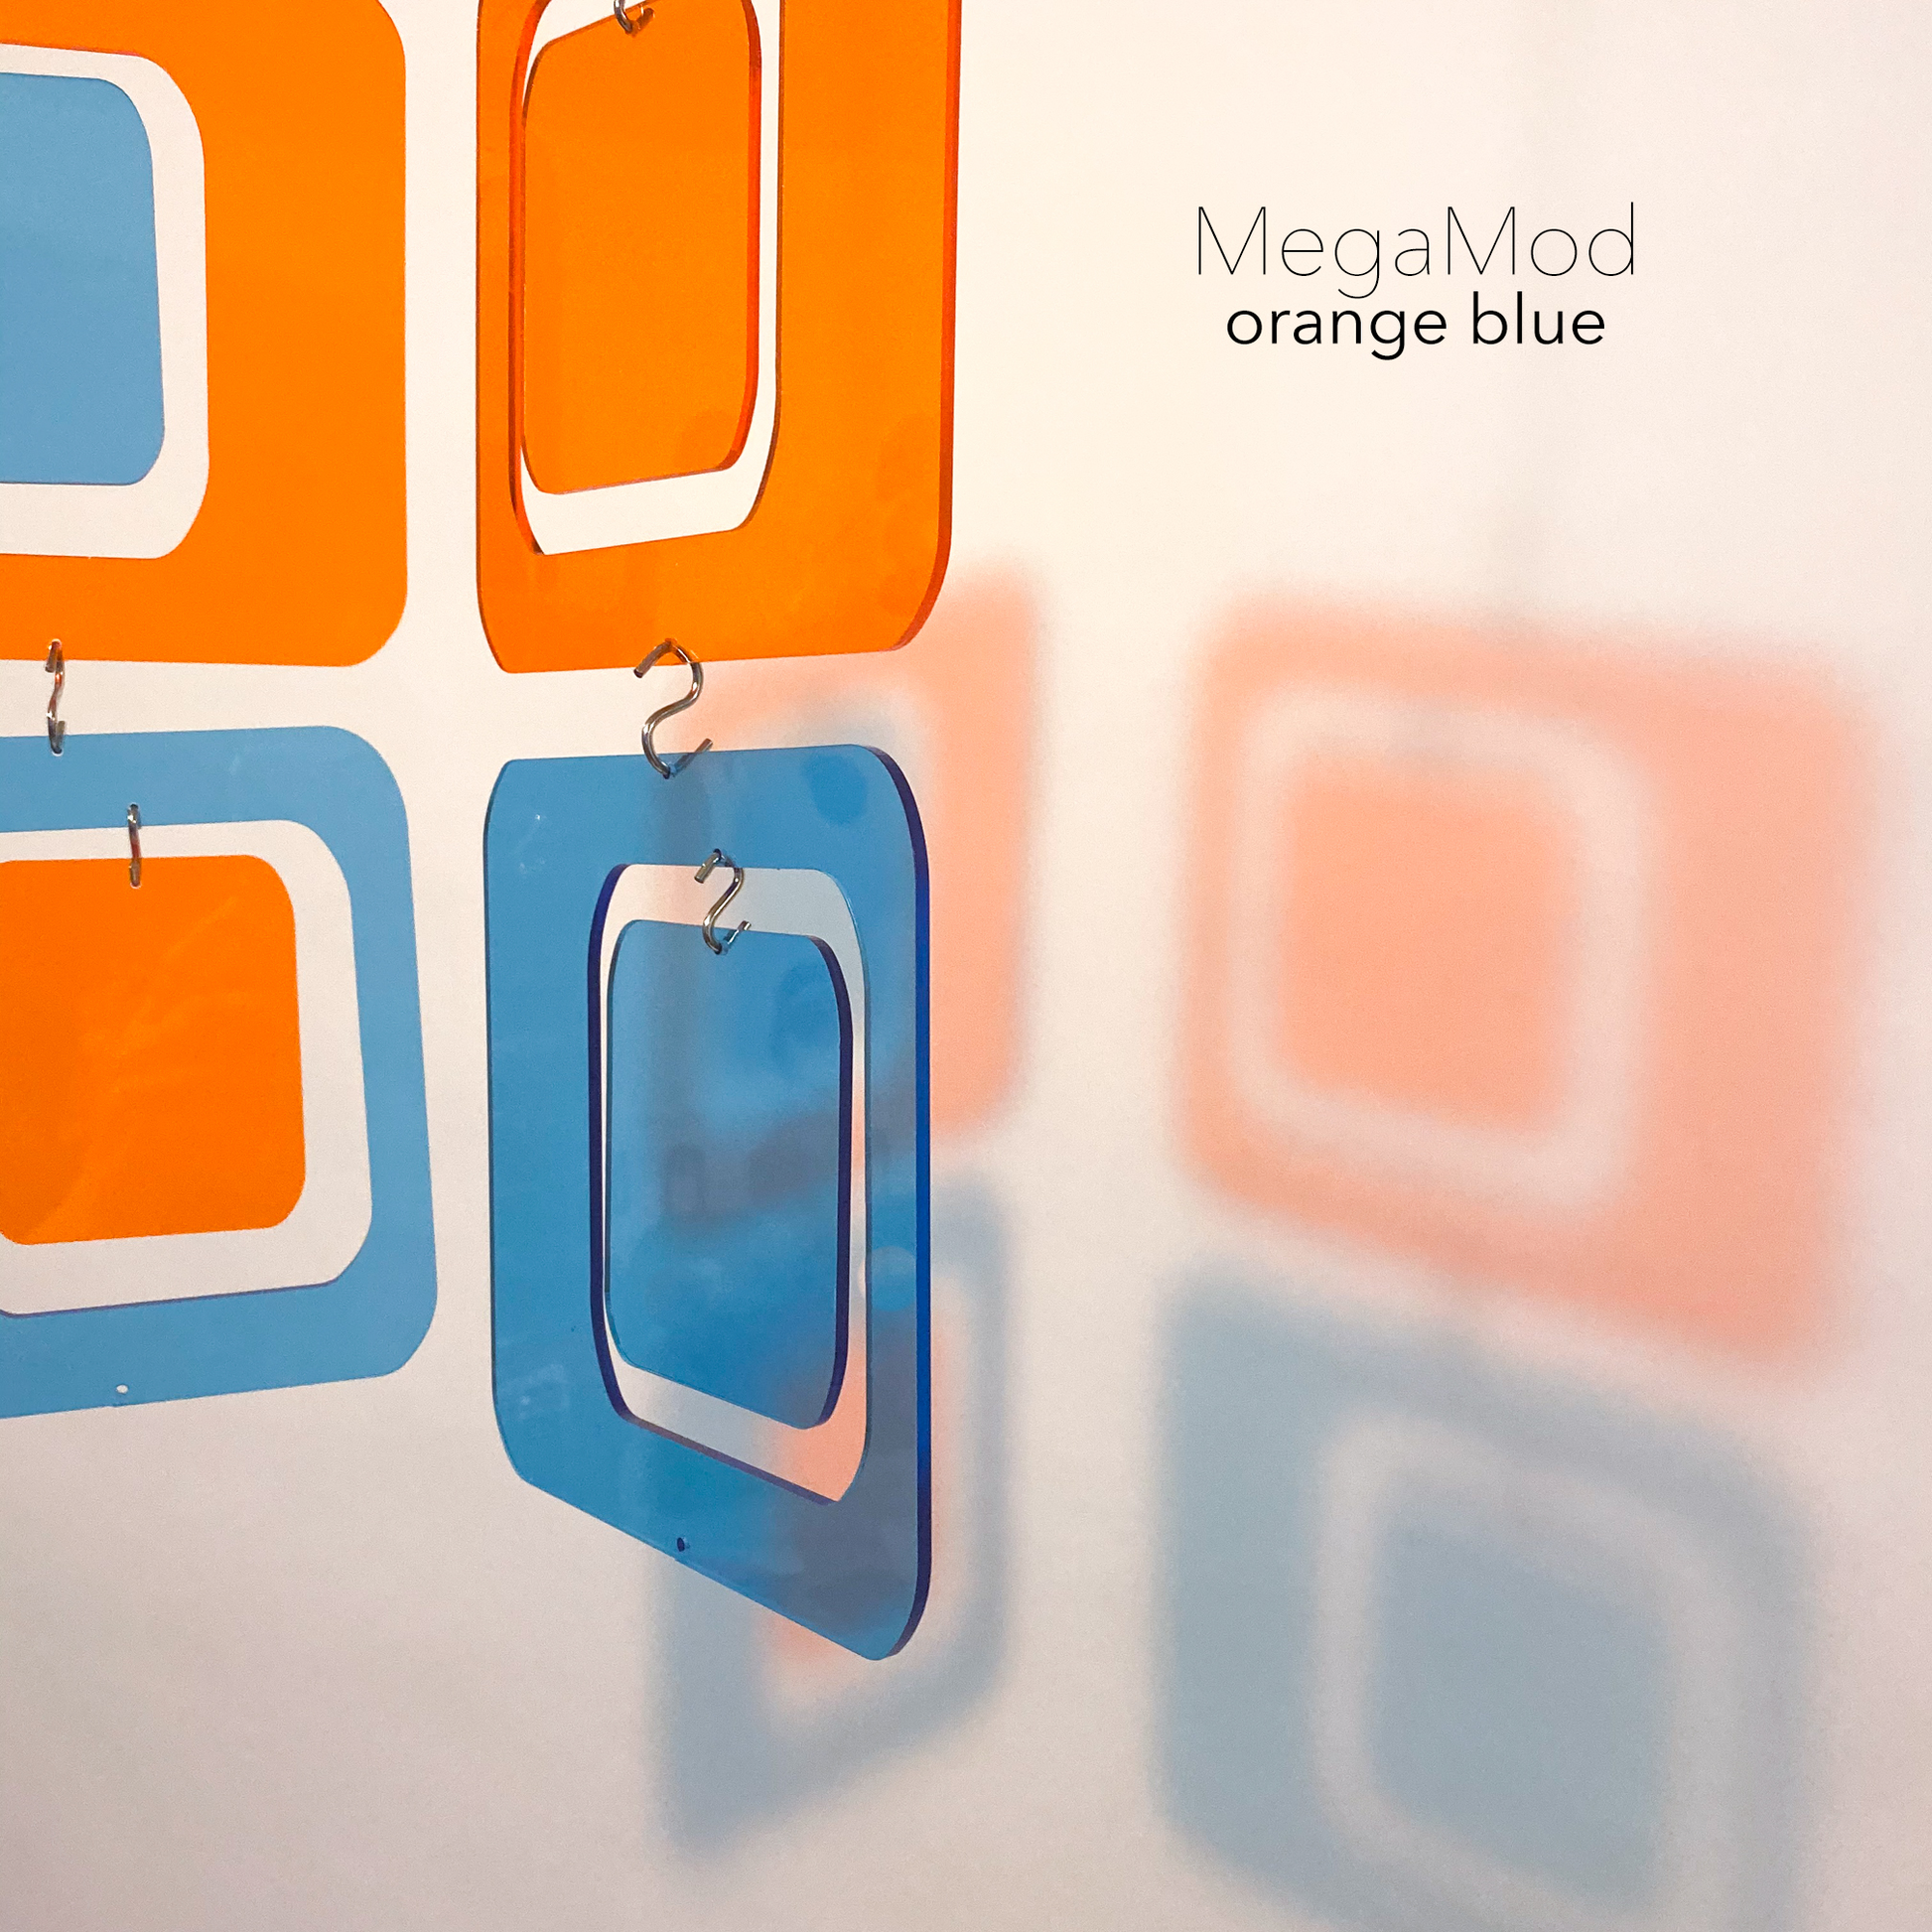 DIY Kits in Blue and Orange Coolsville Reflective Room Divider, Curtain, Partition, Wall Art, Mobile by AtomicMobiles.com